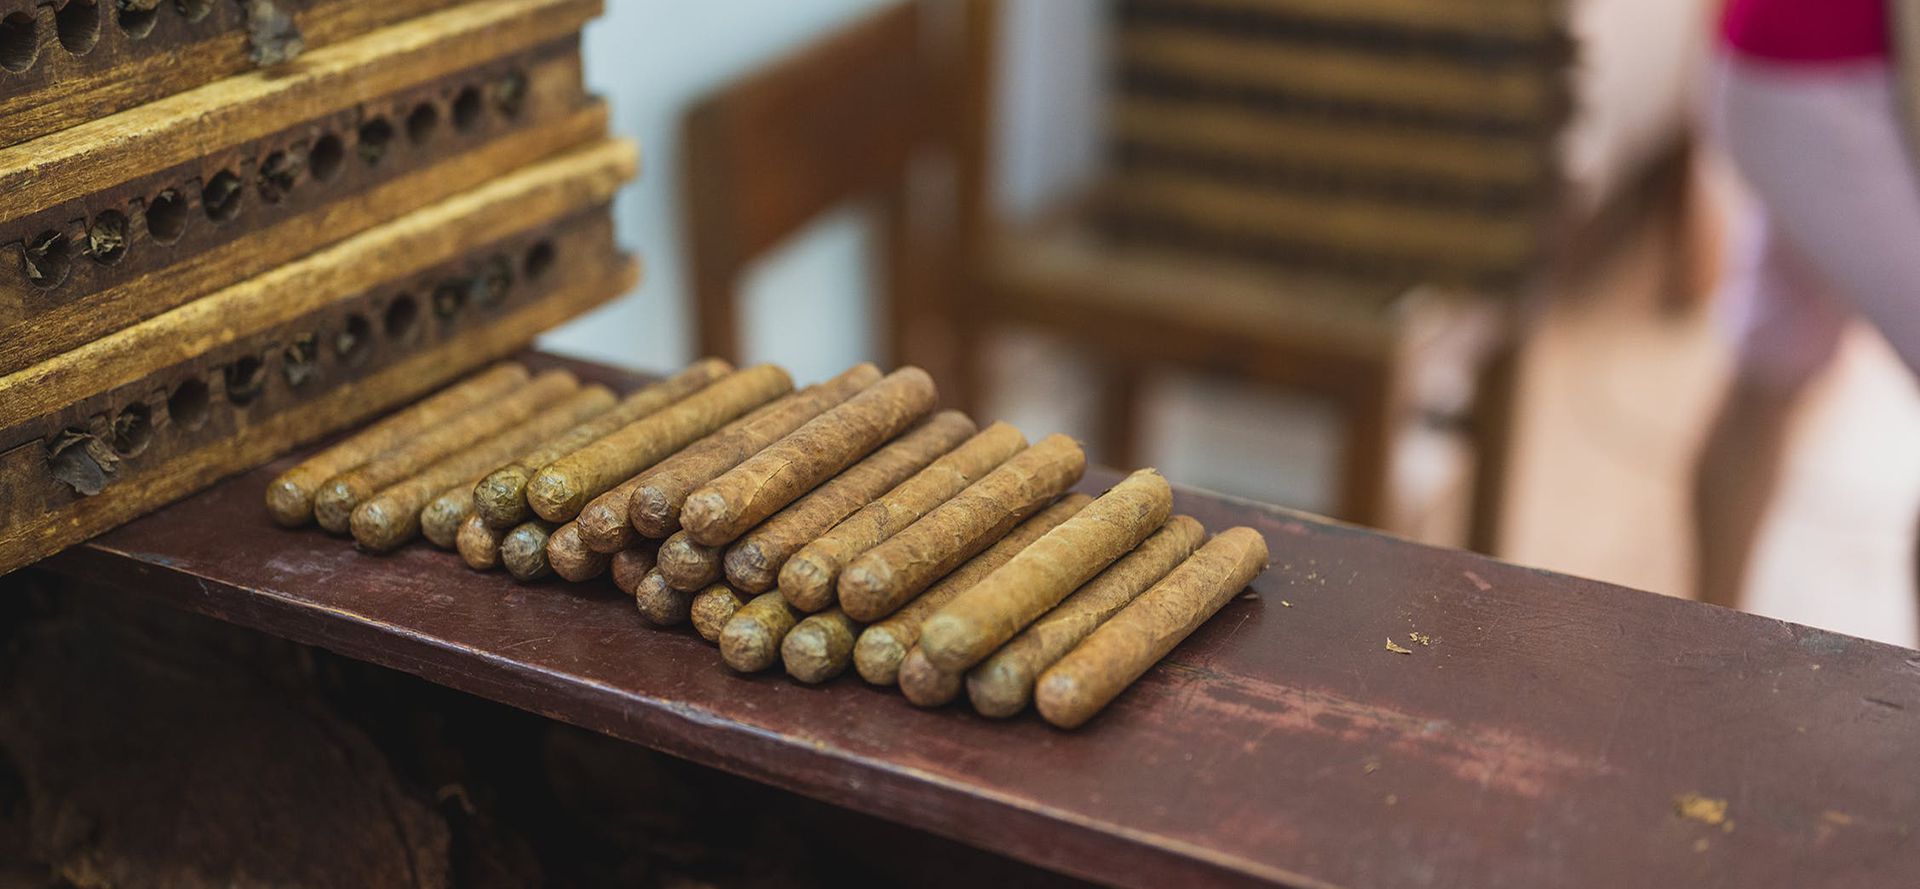 Cigars On The Counter.